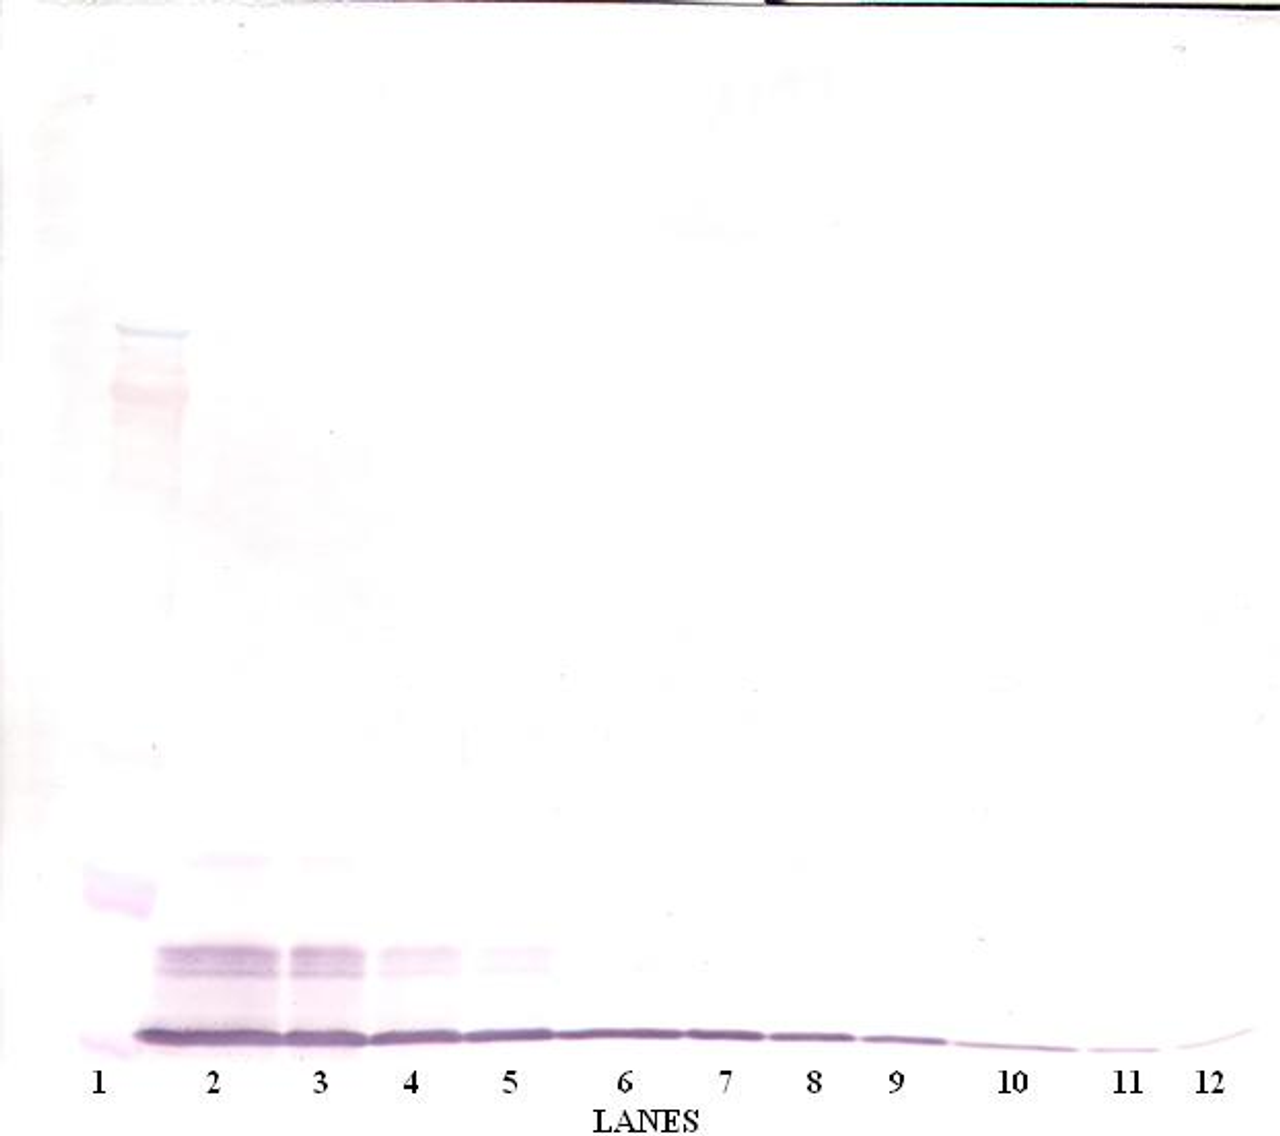 To detect Murine MIP-1-beta by Western Blot analysis this antibody can be used at a concentration of 0.1 - 0.2 ug/ml. Used in conjunction with compatible secondary reagents the detection limit for recombinant Murine MIP-1-beta is 1.5 - 3.0 ng/lane, under either reducing or non-reducing conditions.